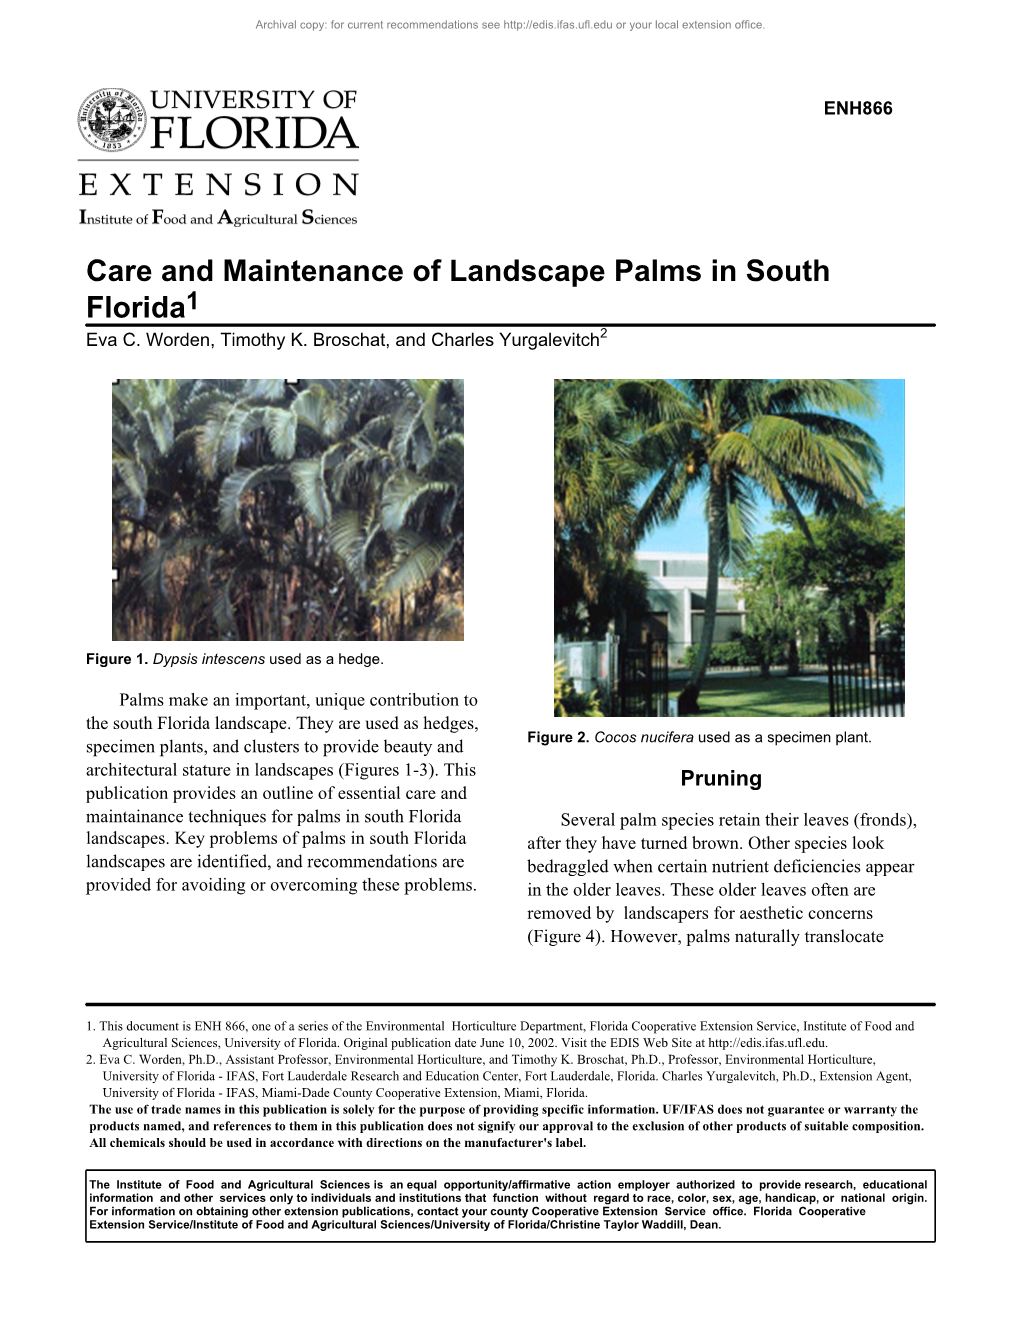 Care and Maintenance of Landscape Palms in South Florida1 Eva C